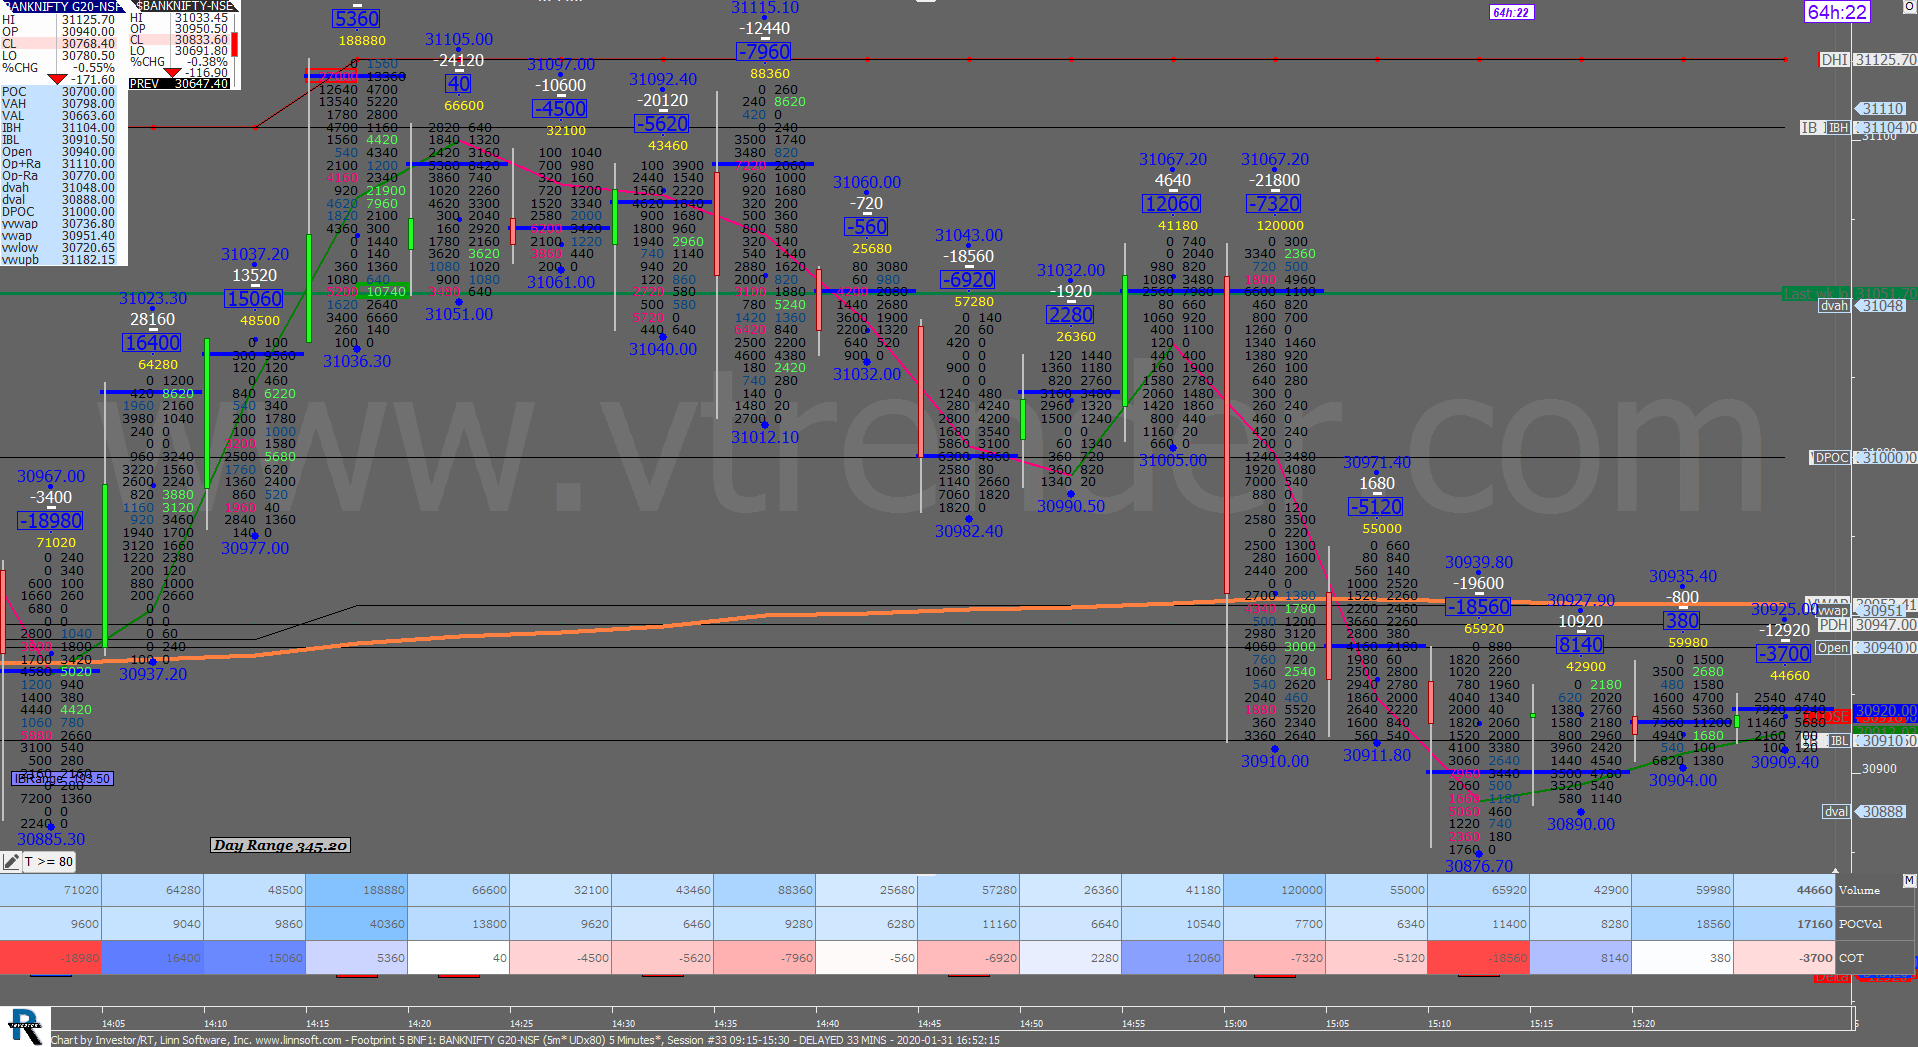 5 41 Order Flow Charts Dated 31St Jan 2020 (5 Mins) Banknifty Futures, Day Trading, Intraday Trading, Intraday Trading Strategies, Nifty Futures, Order Flow Analysis, Support And Resistance, Trading Strategies, Volume Profile Trading